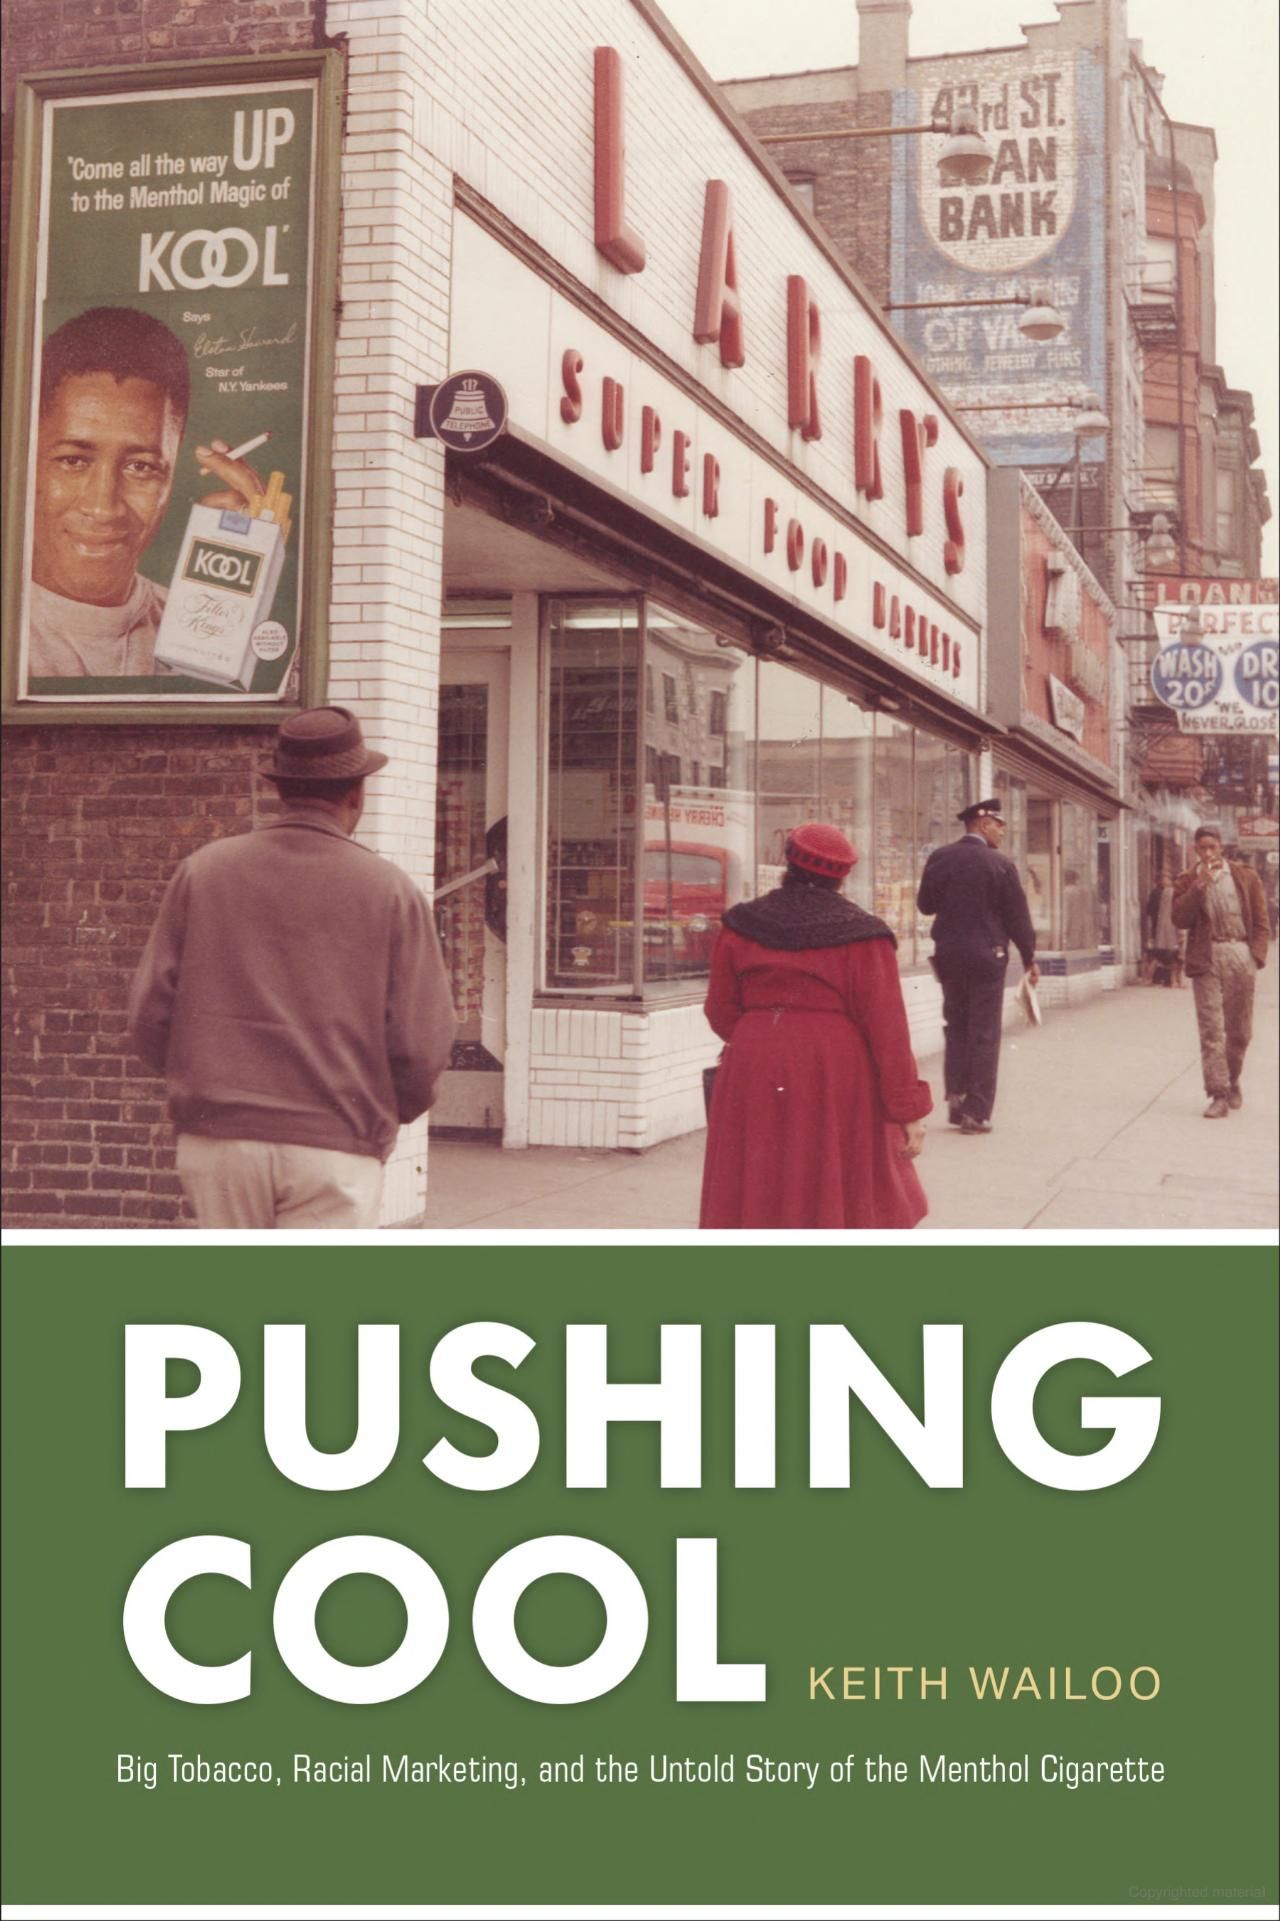 Cover of "Pushing Cool" book